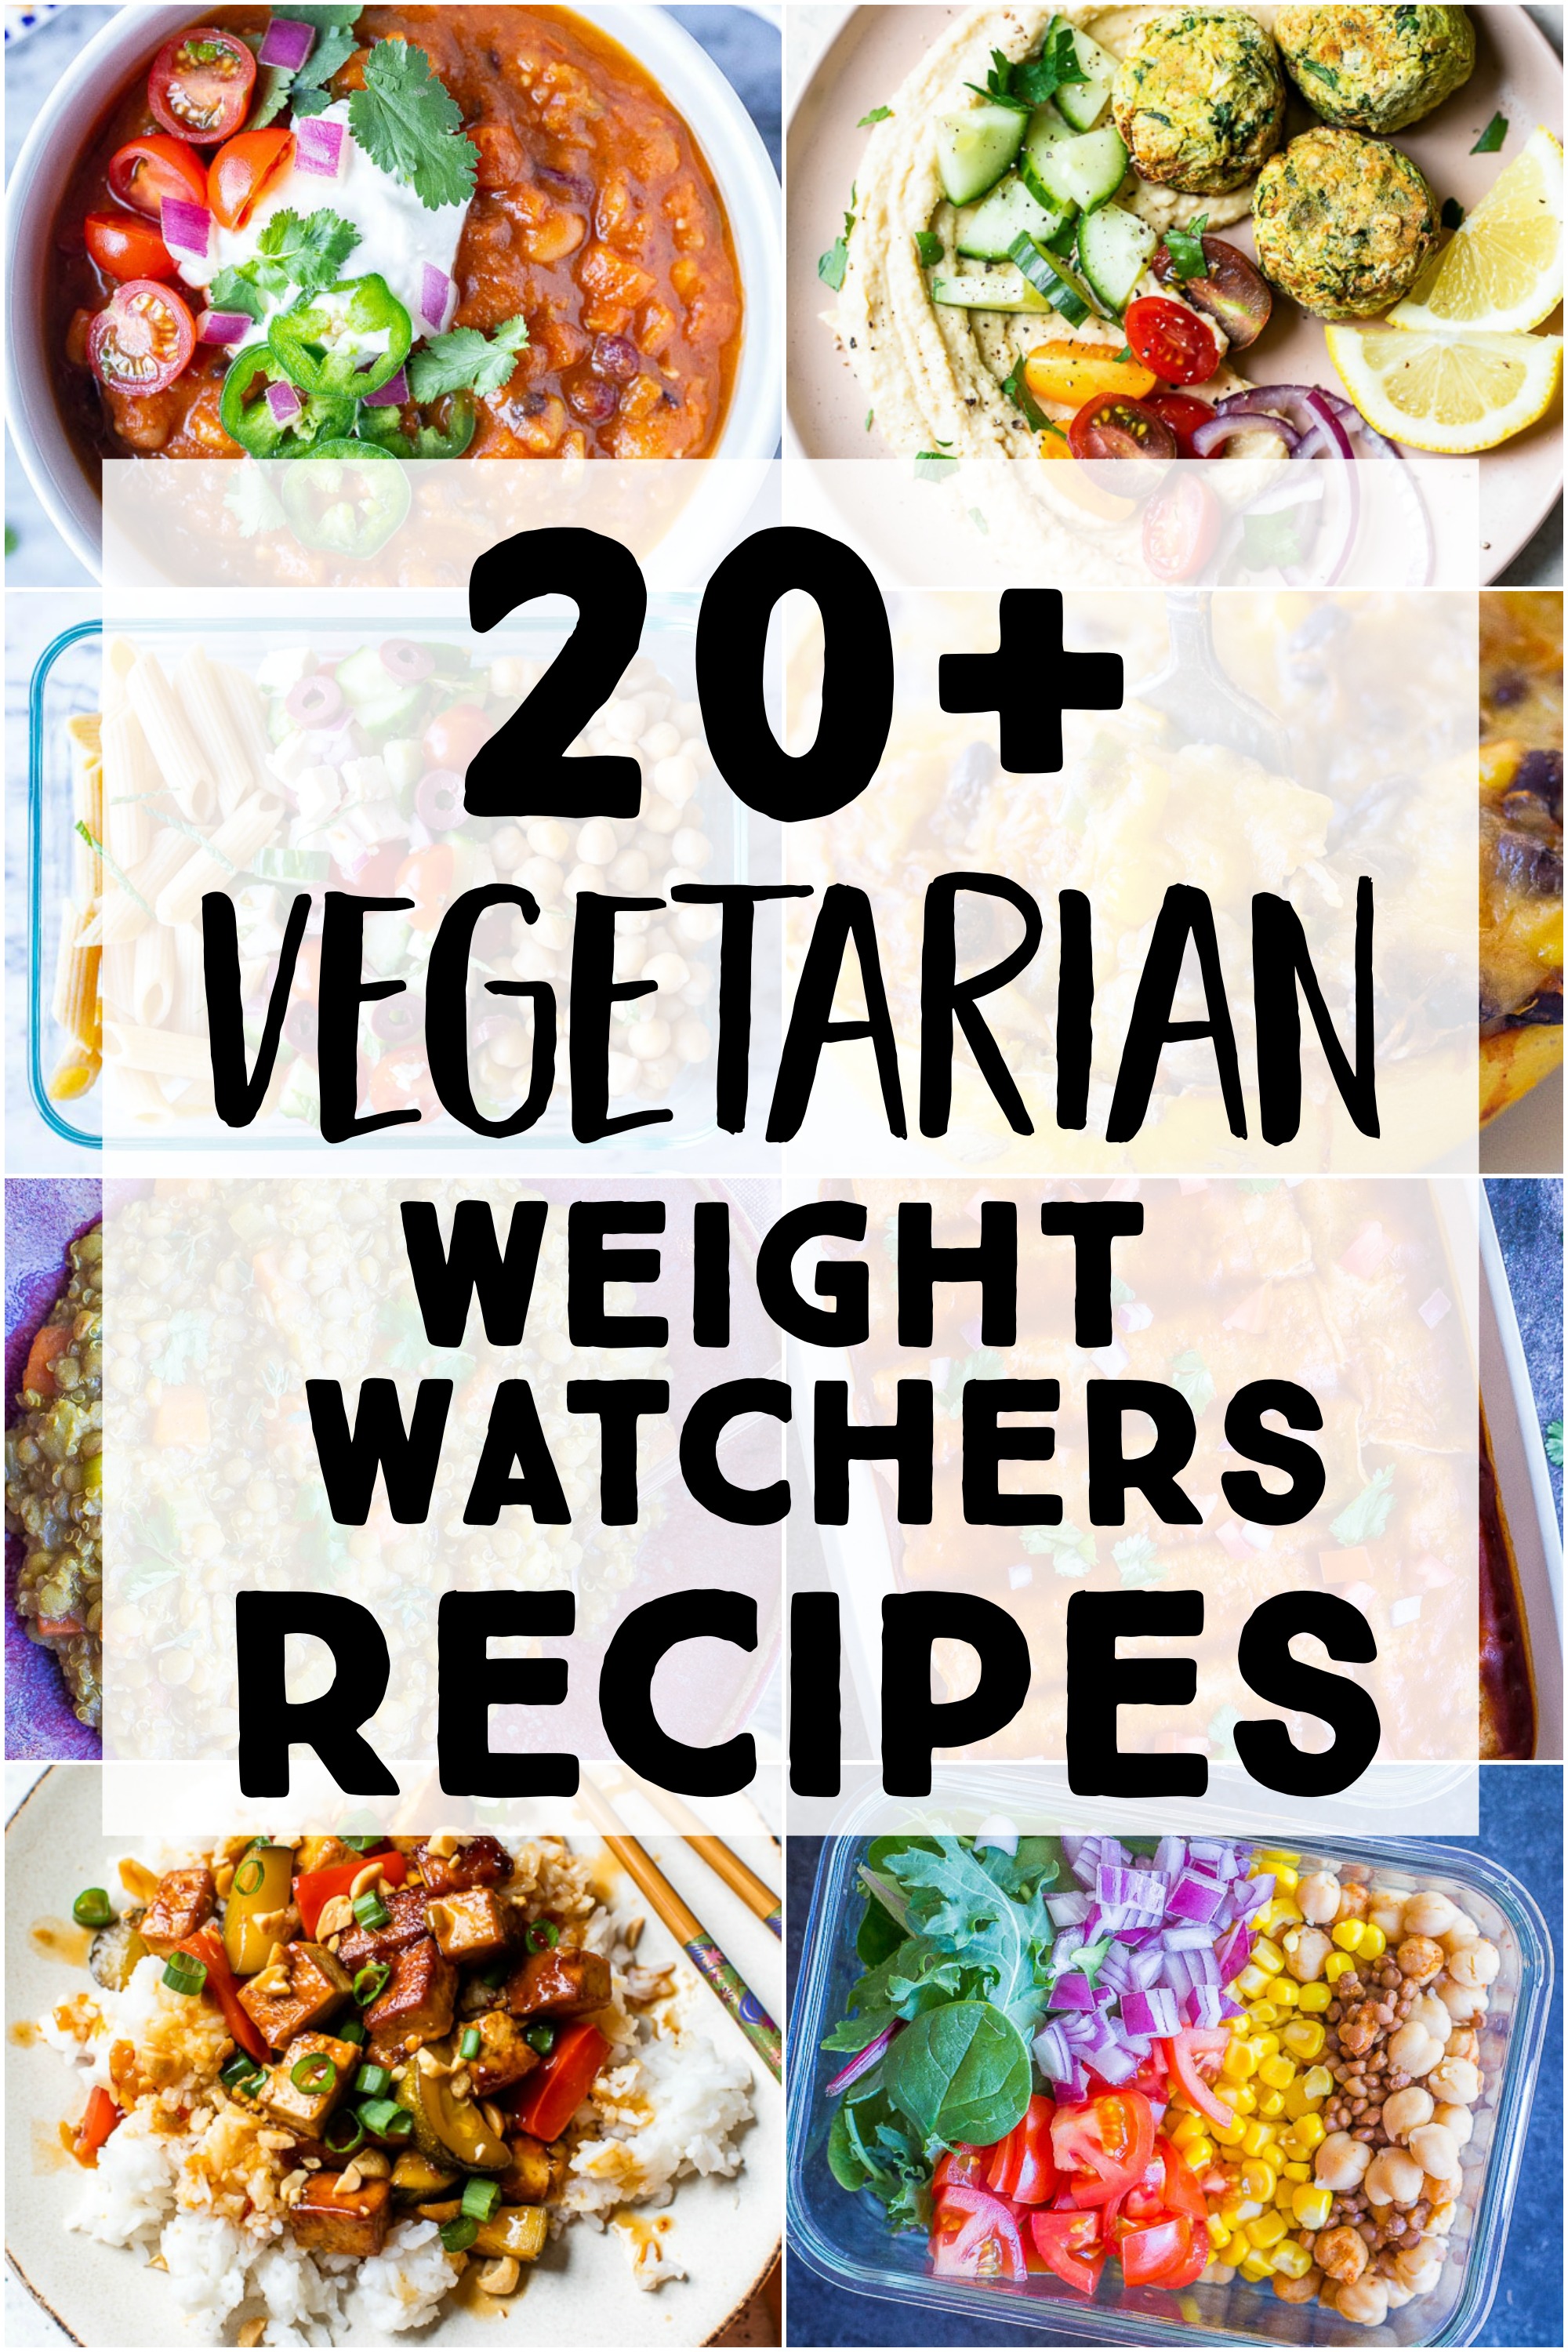 20 Vegetarian Weight Watchers Recipes - She Likes Food